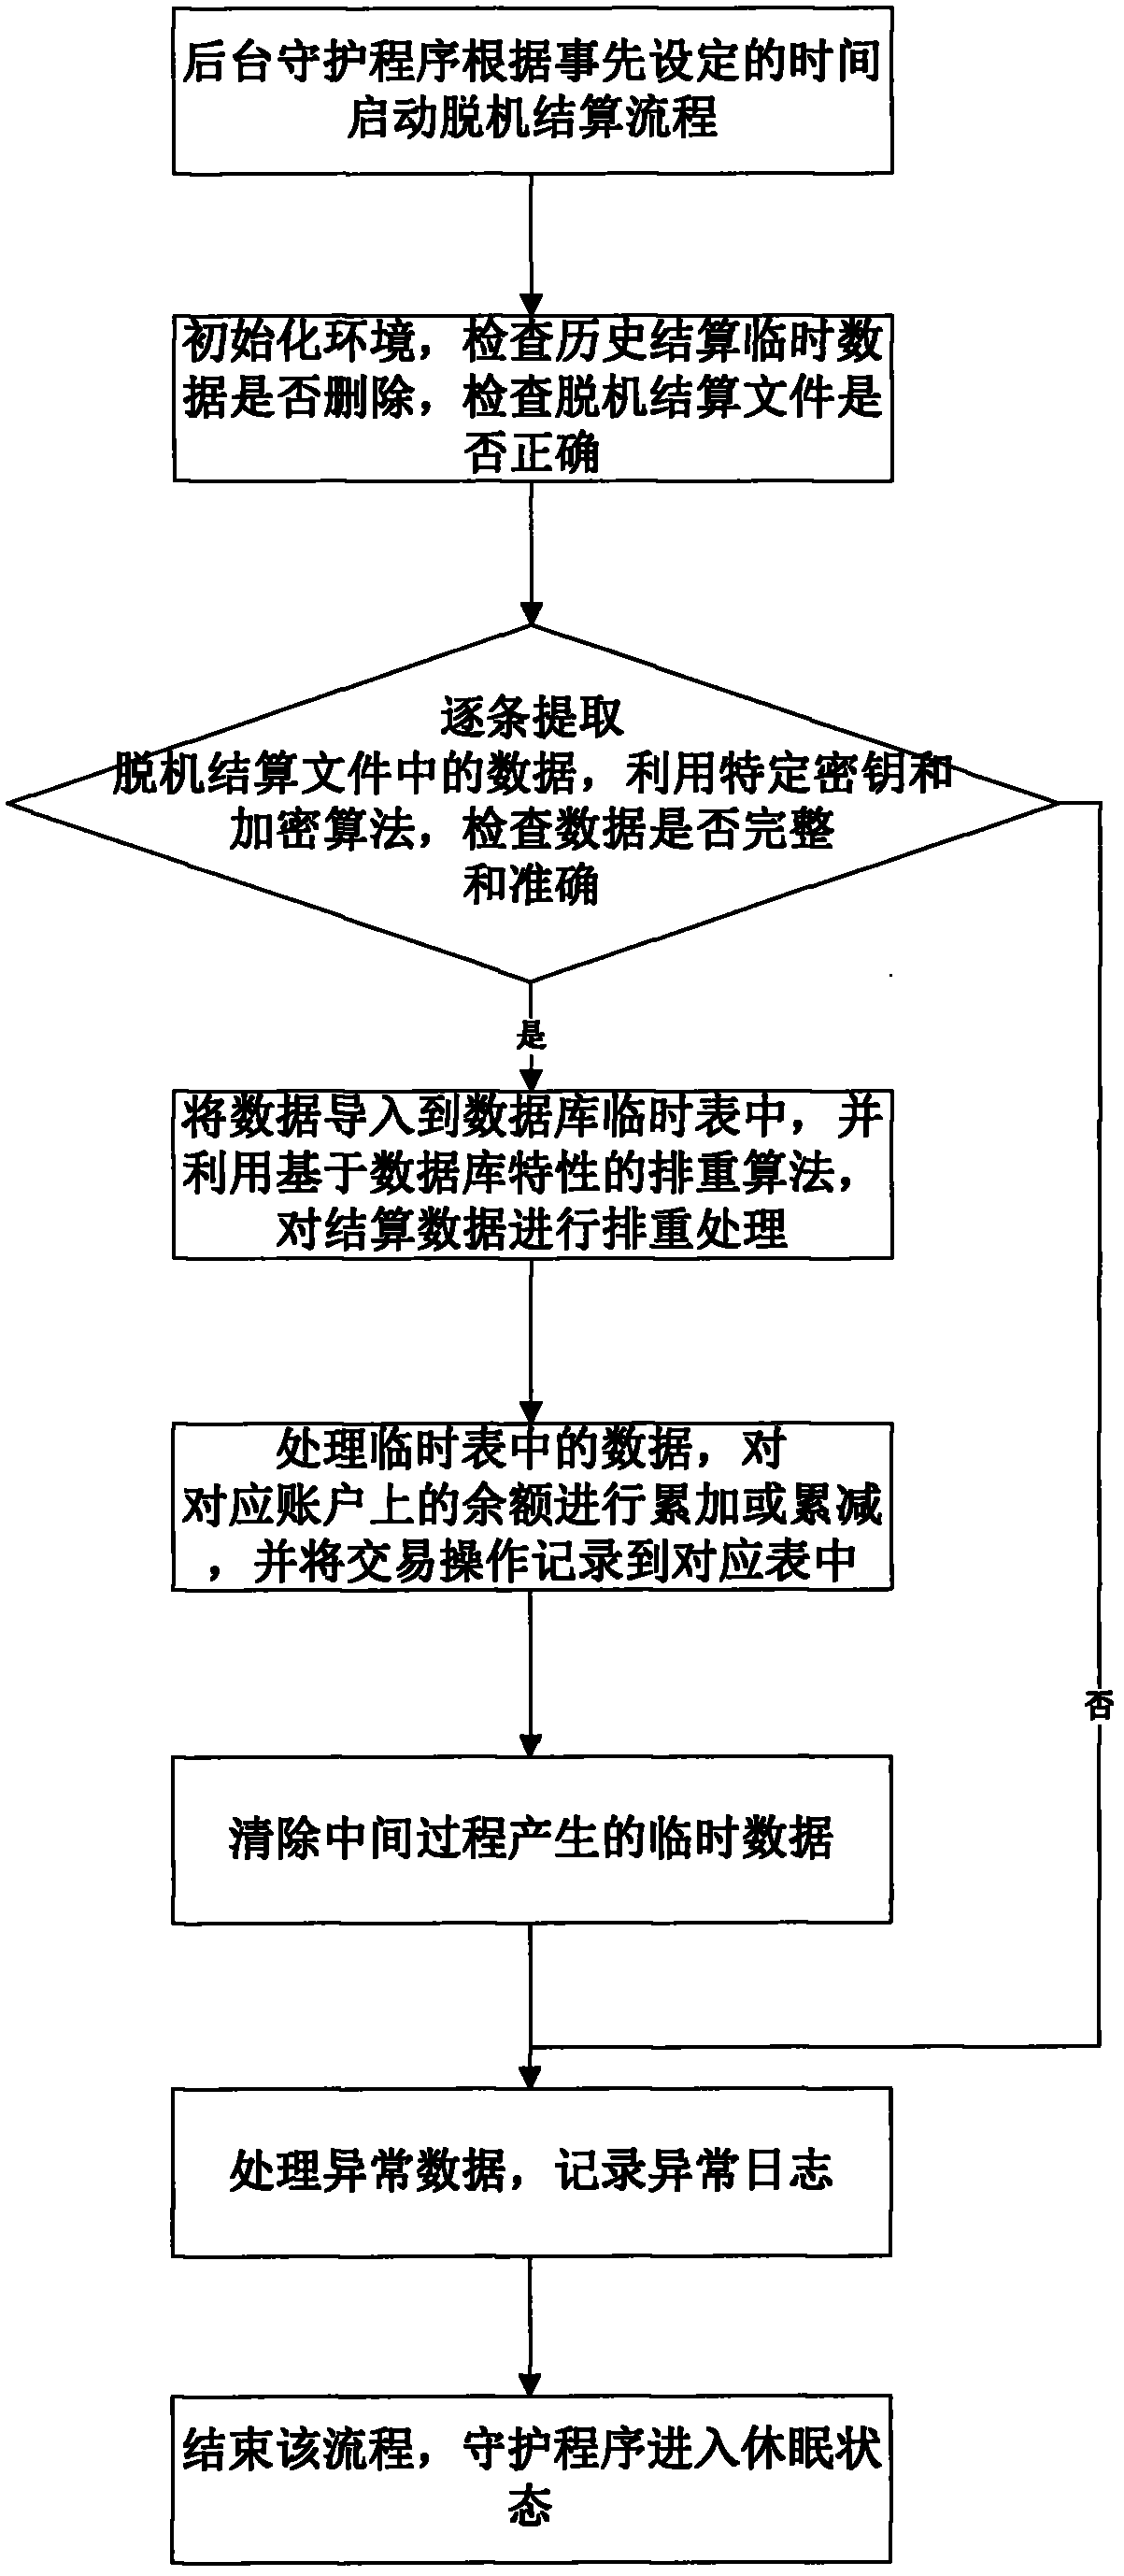 Method for integrated automatic clearing of credit card and account